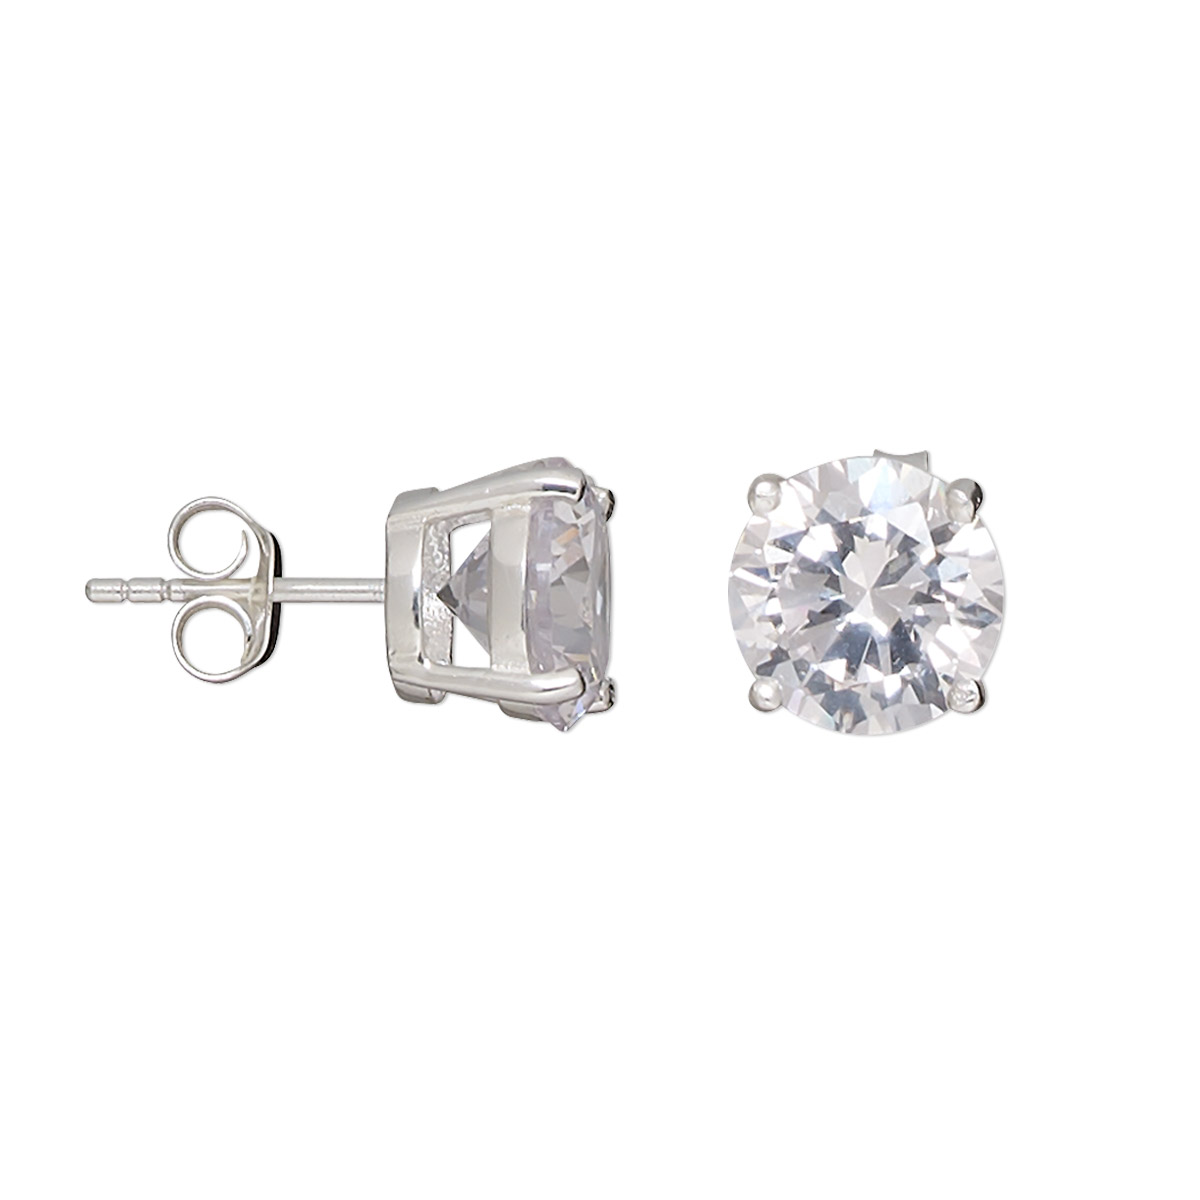 Earstud, sterling silver and cubic zirconia, clear, 10mm faceted round ...